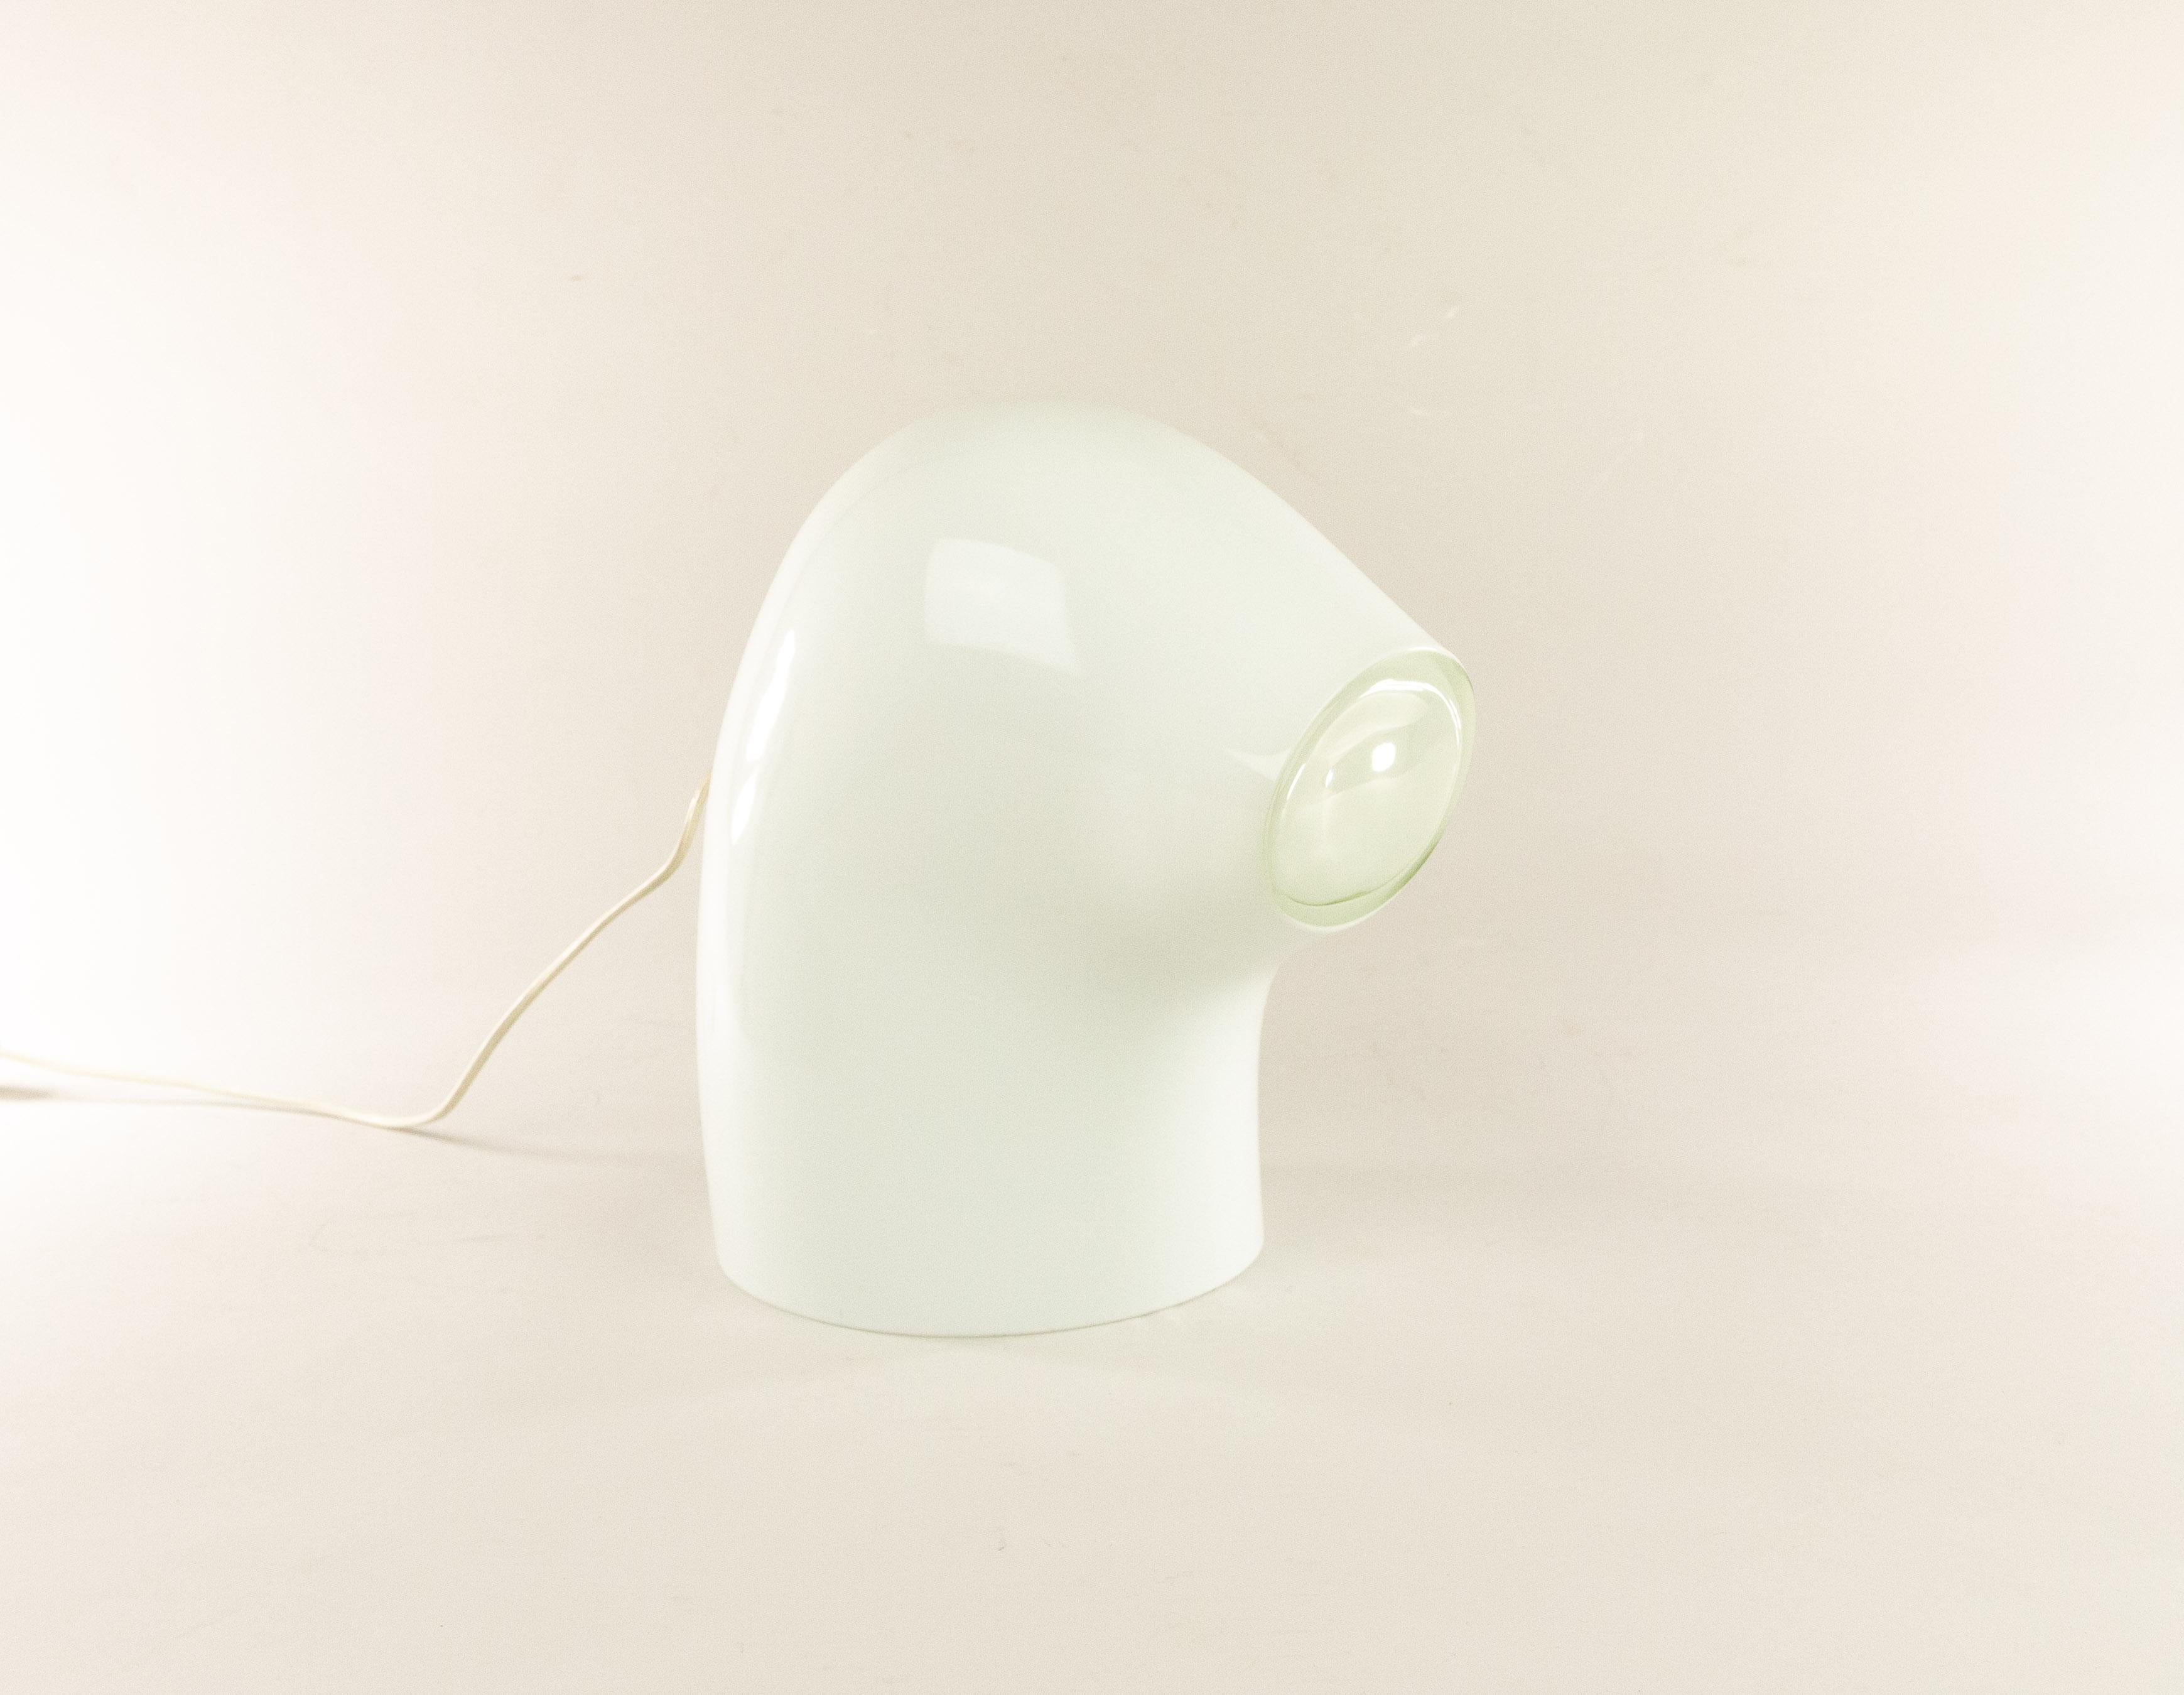 Rare and decorative table lamp L 290 designed by Gino Vistosi for Vetreria Vistosi in the 1970s. It is executed in opaline white Murano glass.

The lamp is an object in itself, and also provides concentrated light through the built-in lens. The